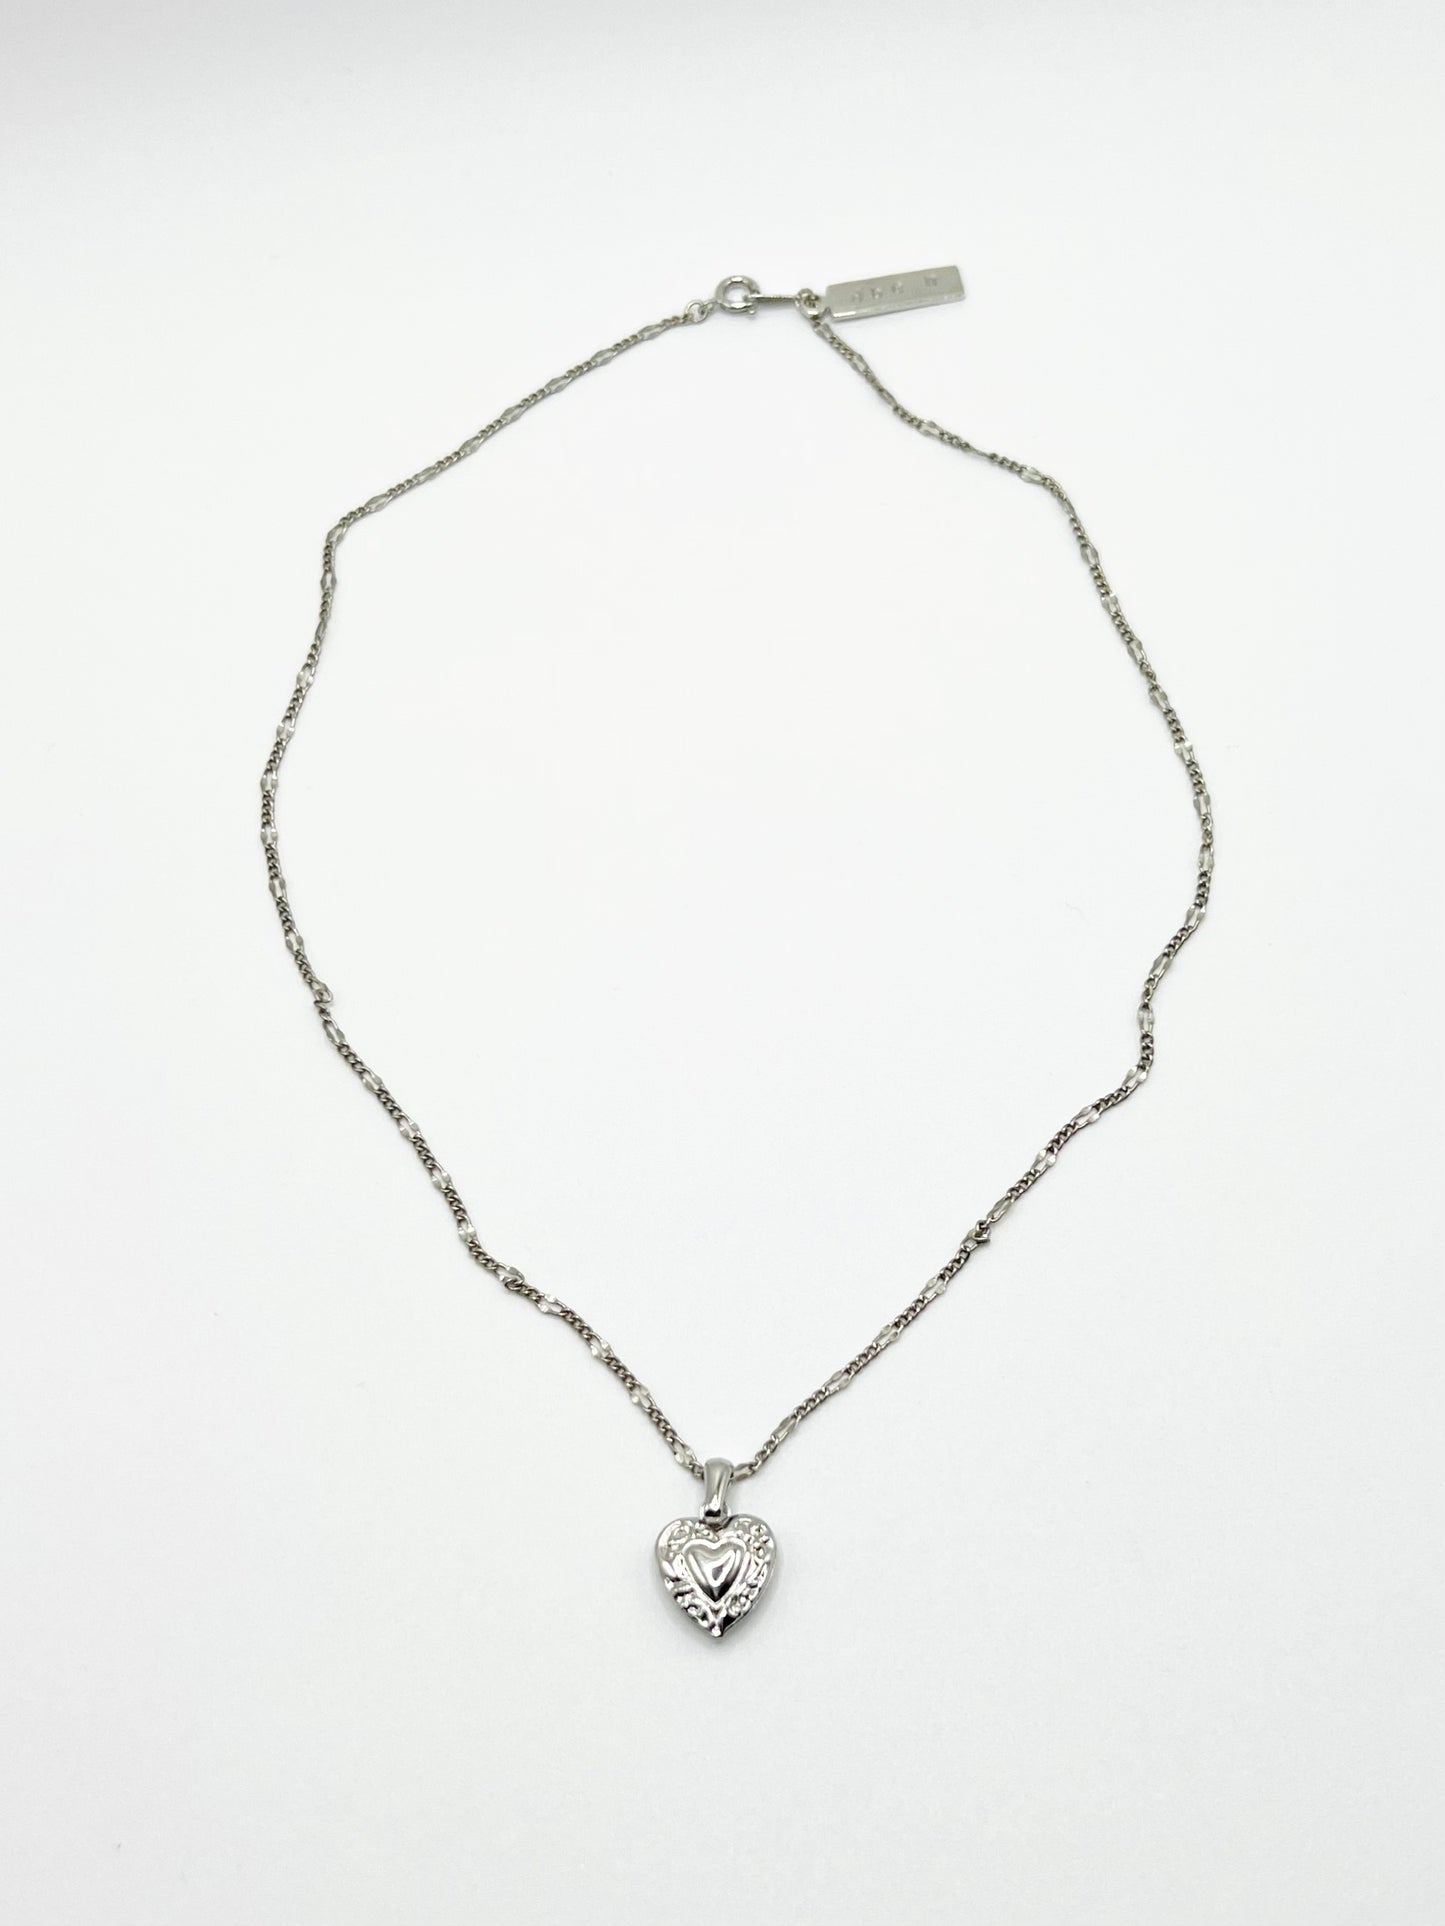 NW heart motif necklace - Silver